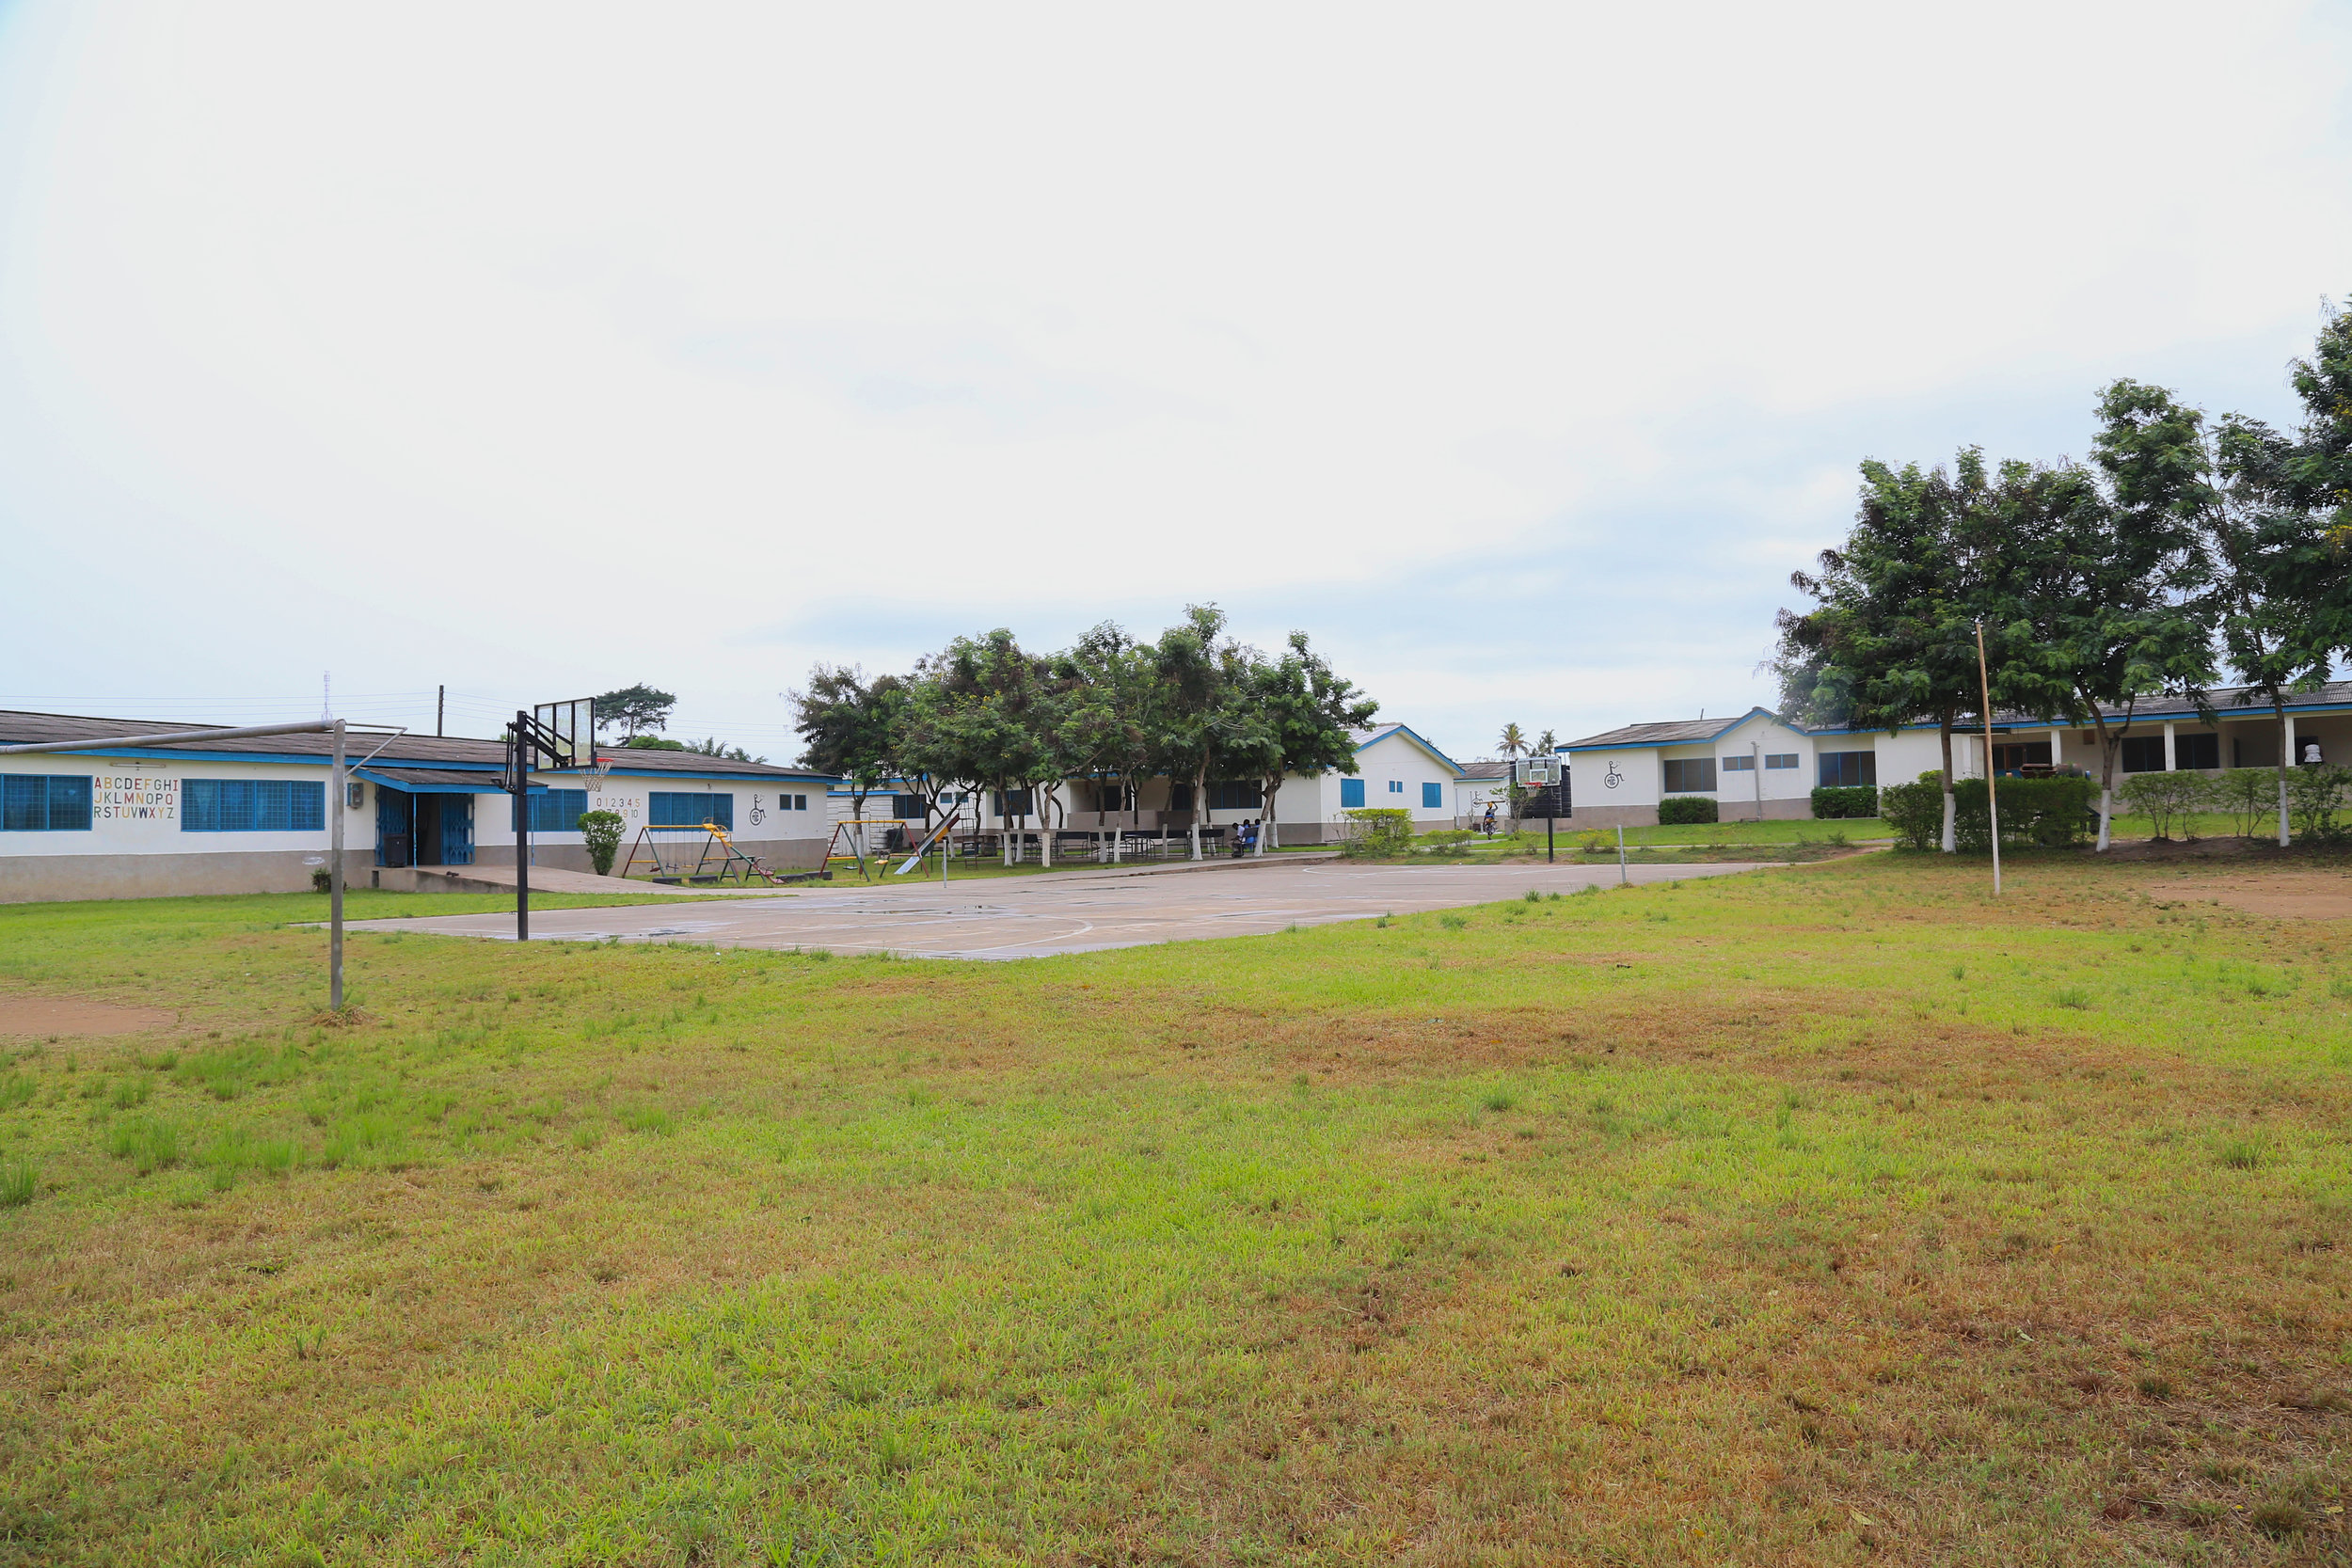 Our school grounds.